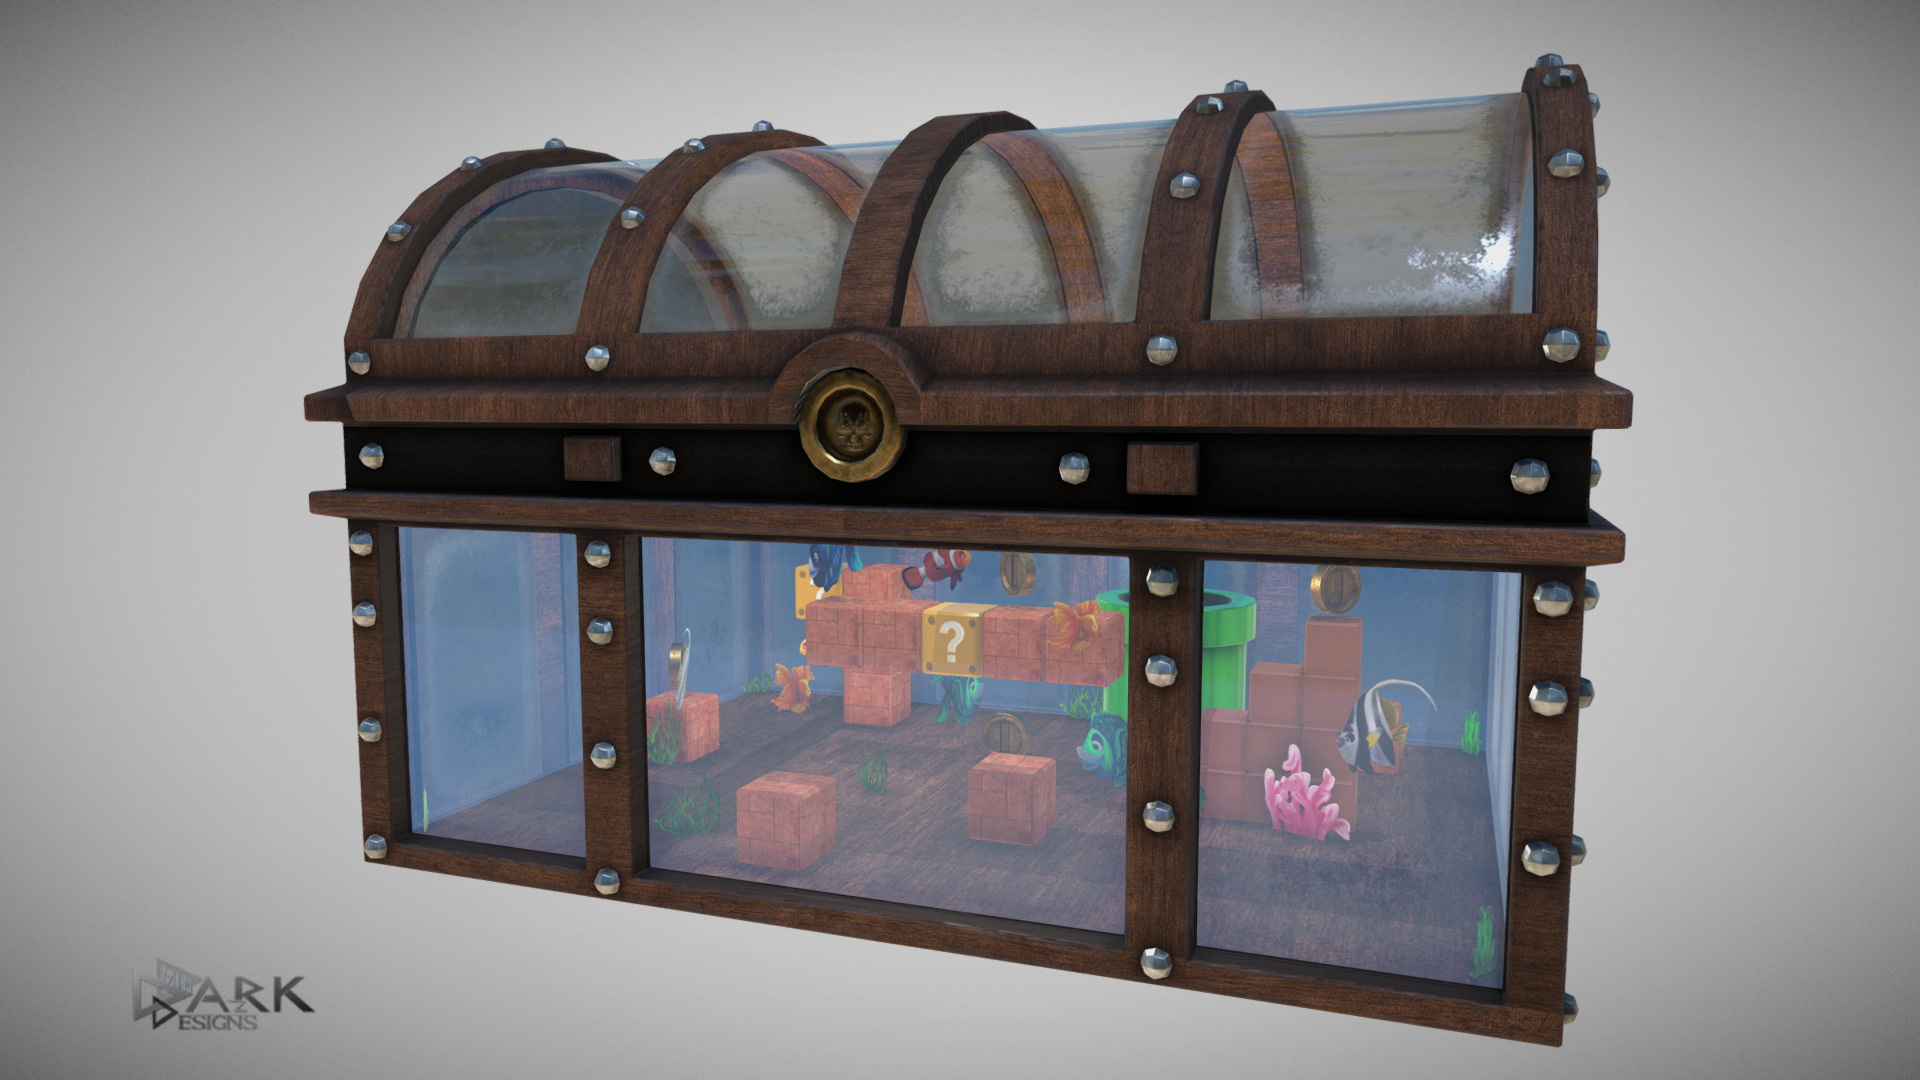 A little Fishtank for all mario and pirate lovers ;) 
with some handpainted little fishes

Because who wouldn't  want a Mario Fishtank at home - Pirate Chest, Fishtank - 3D model by dark-minaz 3d model